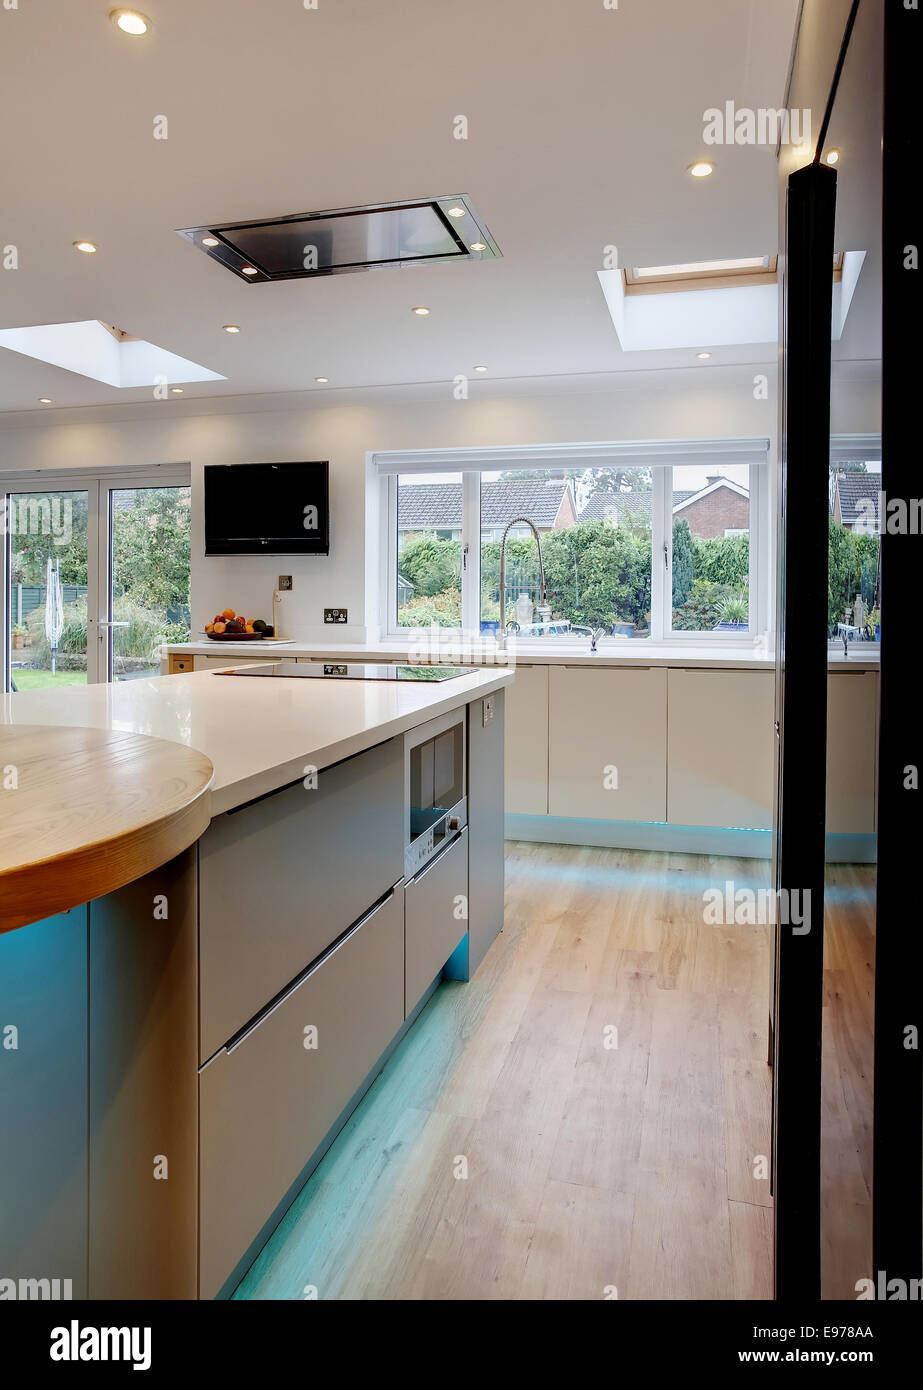 A Kitchen in a home in the UK. Stock Photo